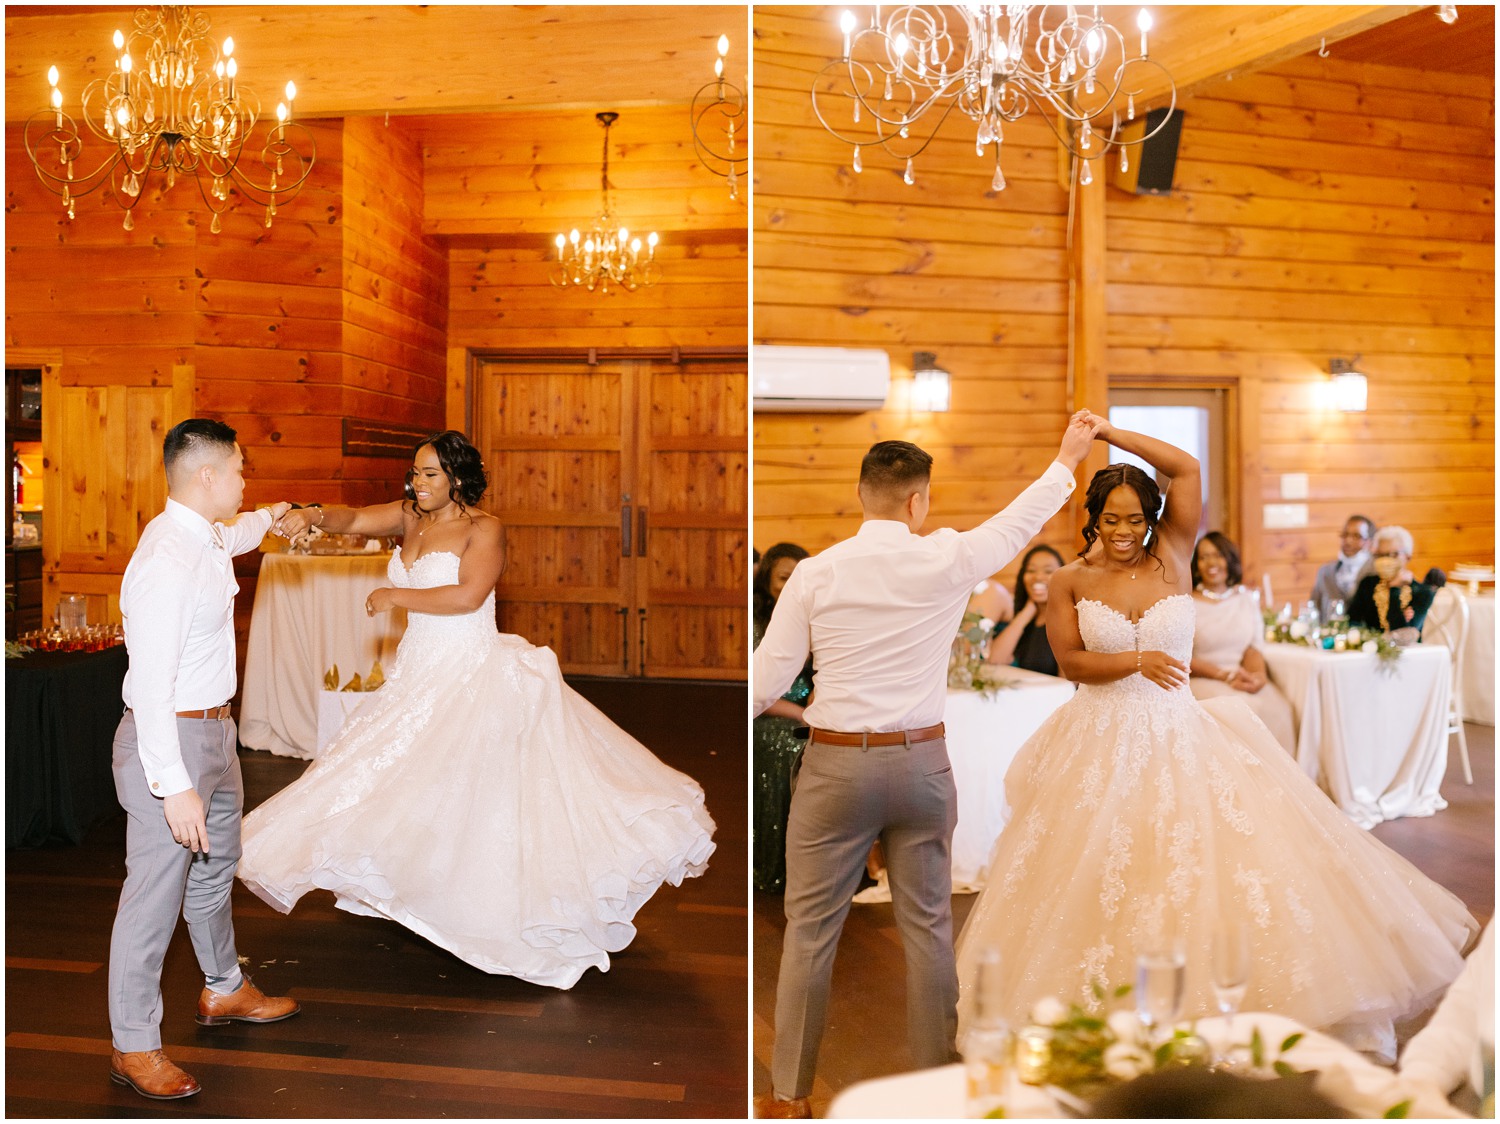 Couple shares their first dance at The Barn at Valhalla